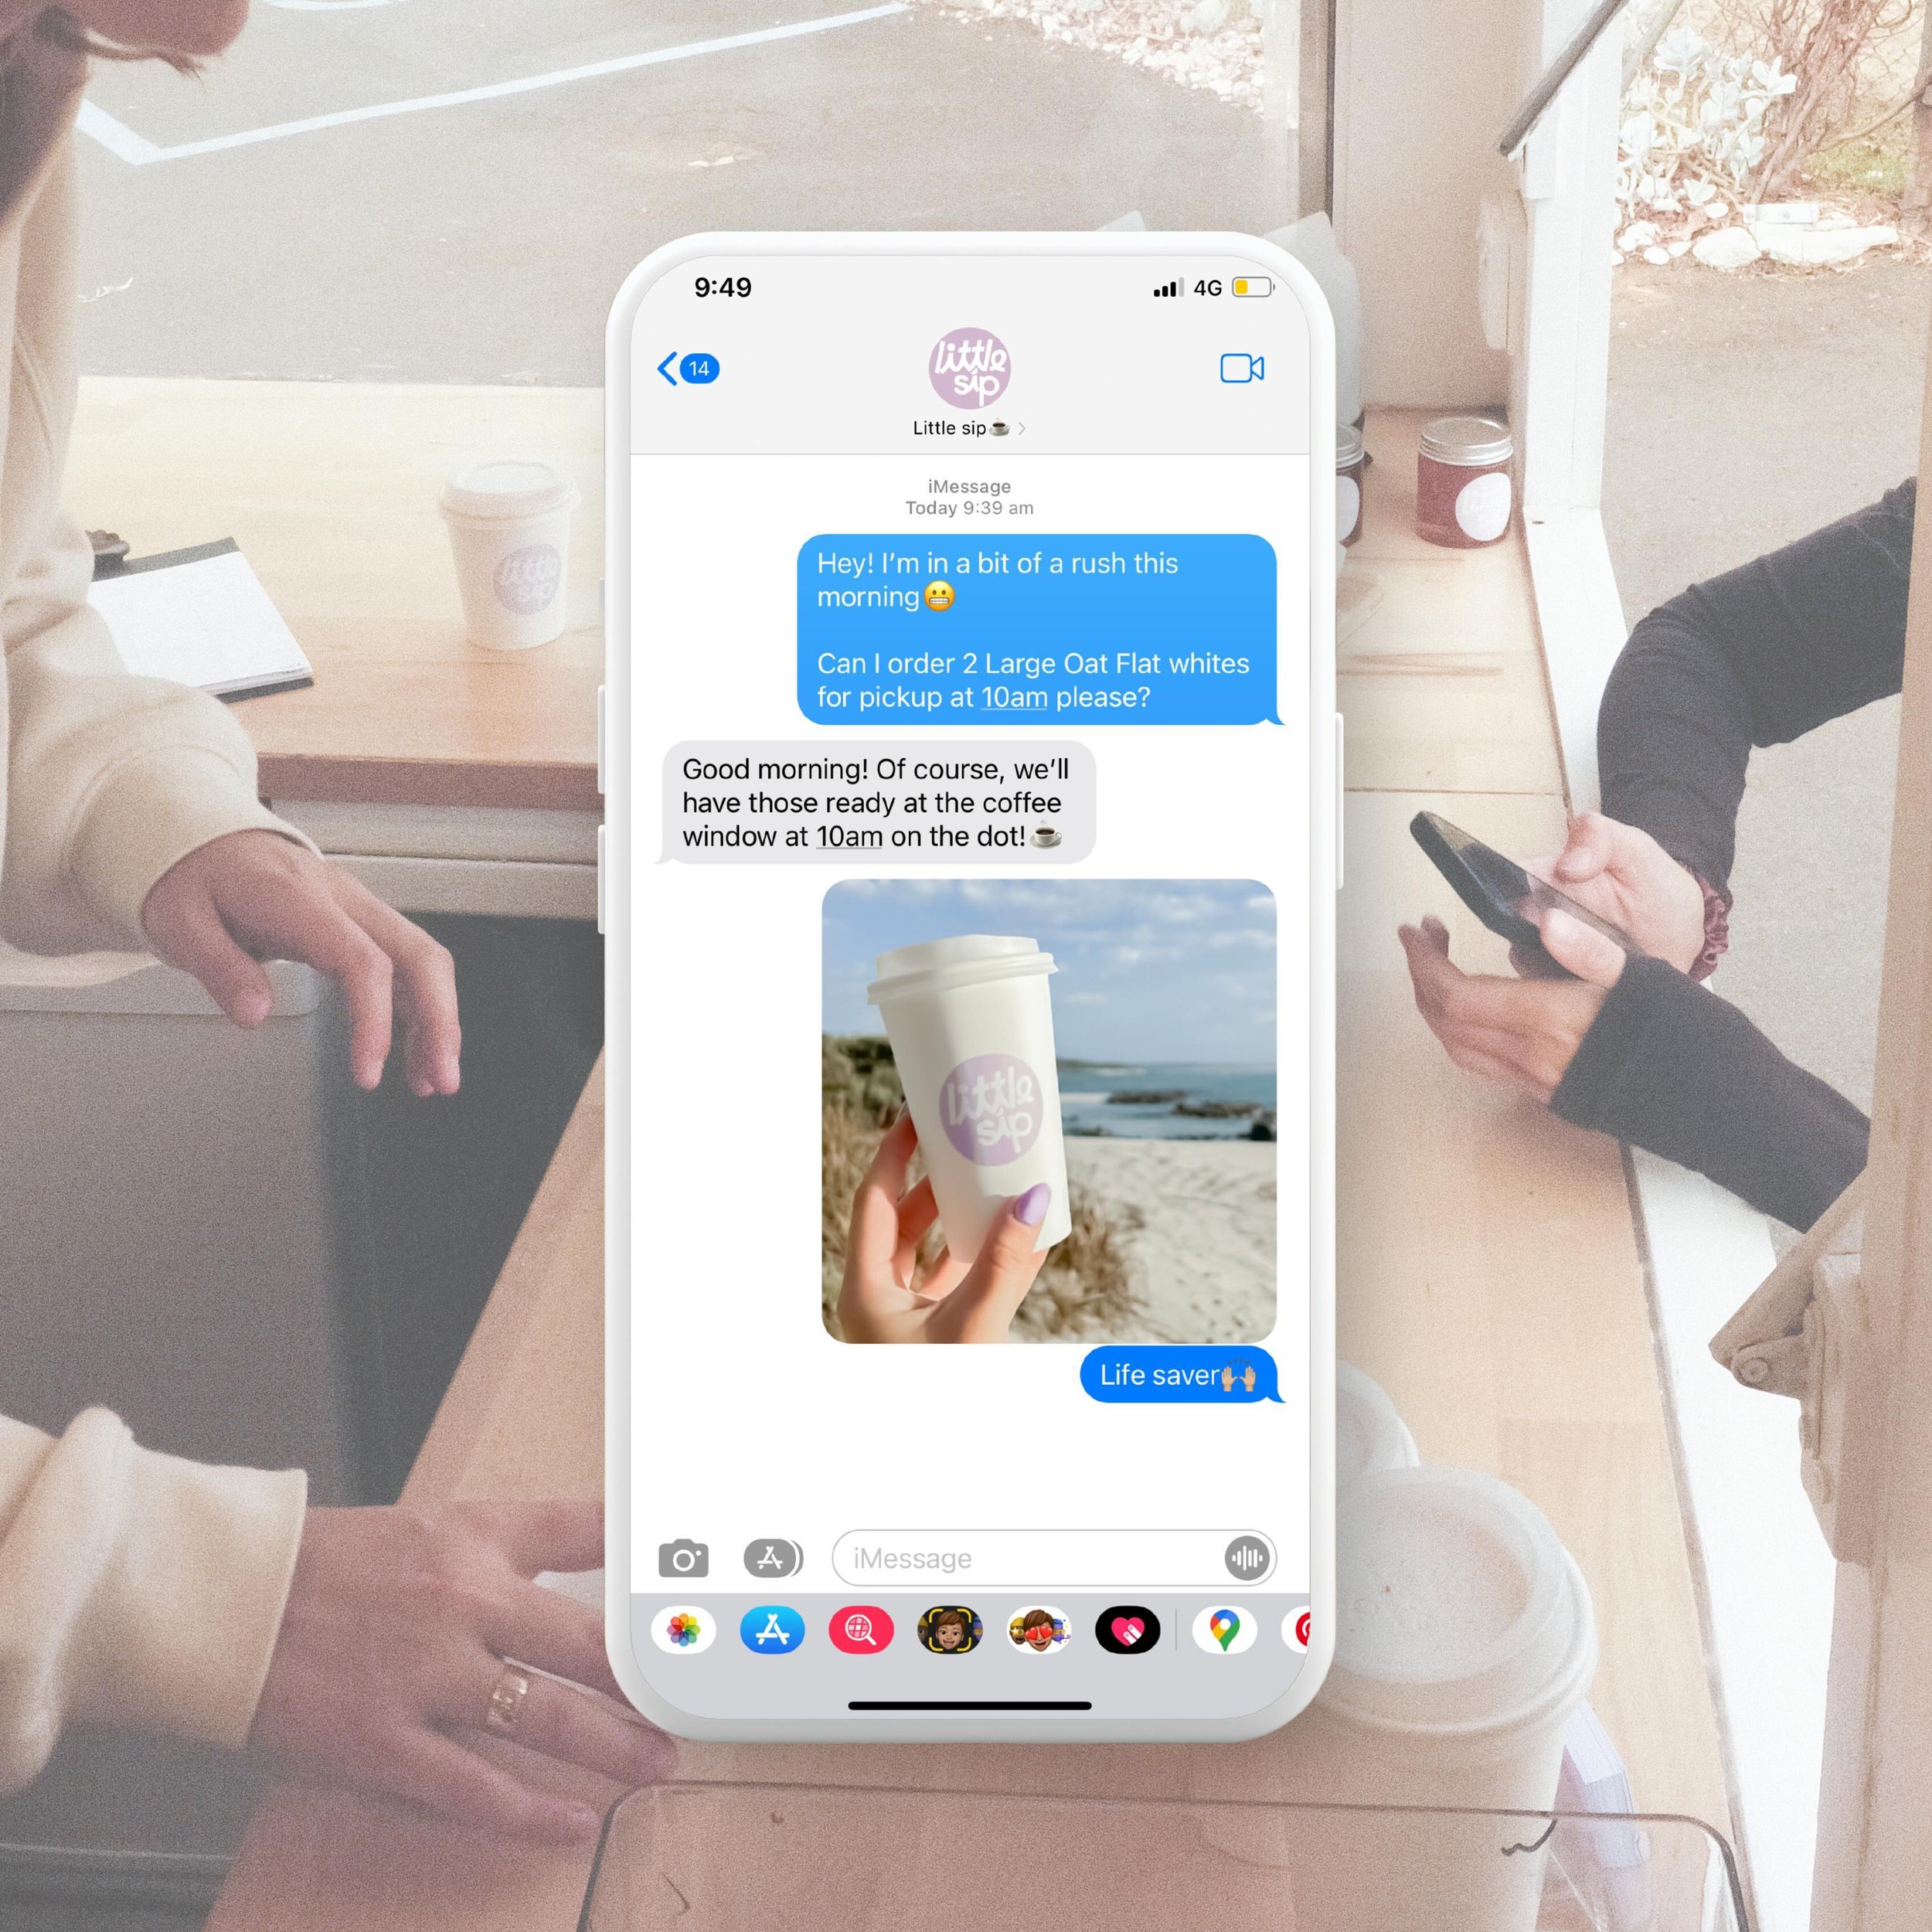 In a rush and need a quick caffeine fix?
Text ahead to skip the line!

Just text with your Name, Order and pickup time to 0474 811 419 and we&rsquo;ll have it ready and waiting for you💜